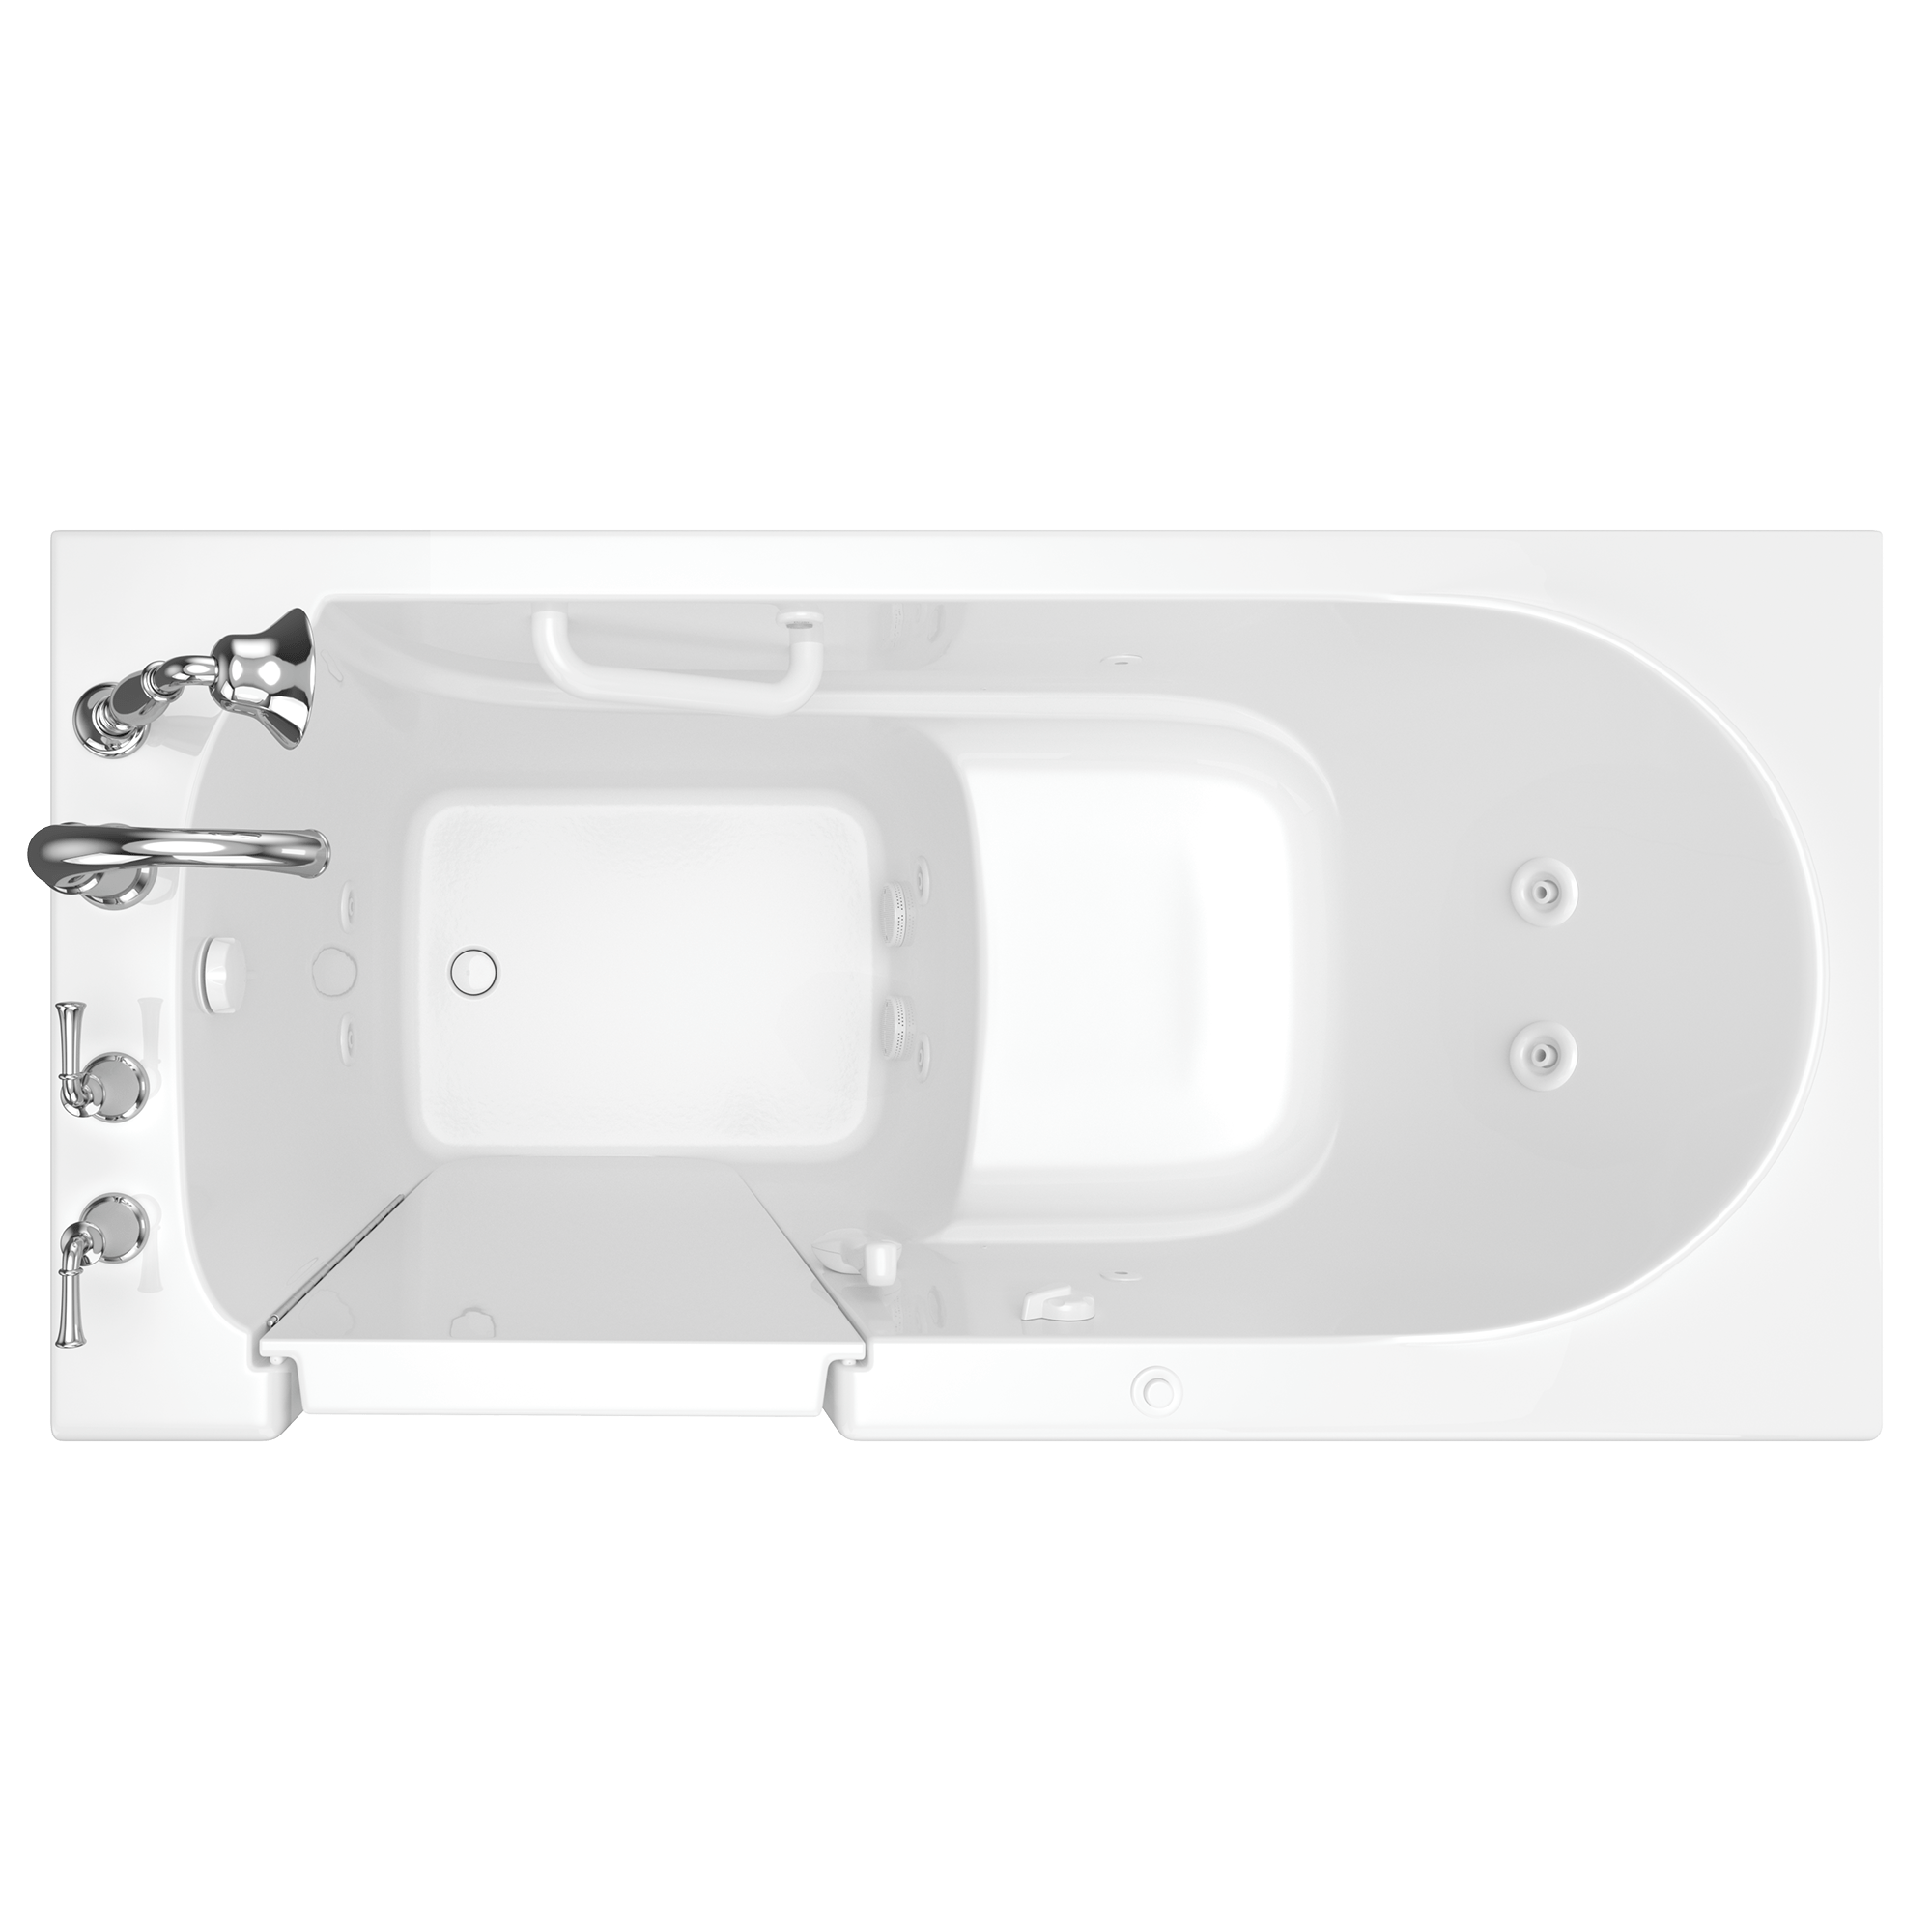 Gelcoat Value Series 30 x 60 -Inch Walk-in Tub With Whirlpool System - Left-Hand Drain With Faucet